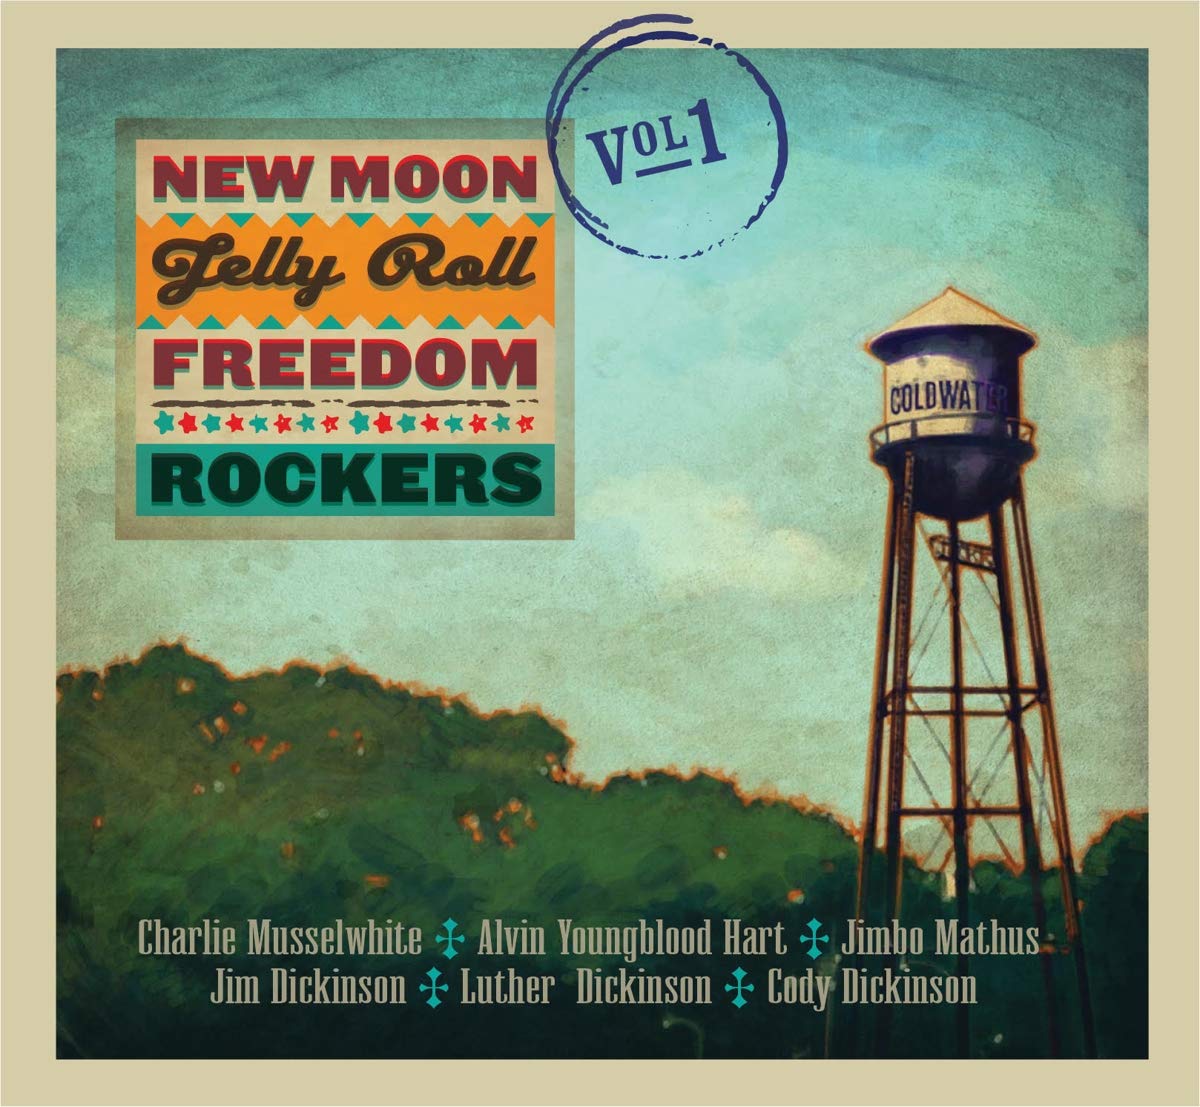 Raw Roots Super Session New Moon Jelly Roll Freedom Rockers Gets a Long Delayed Release